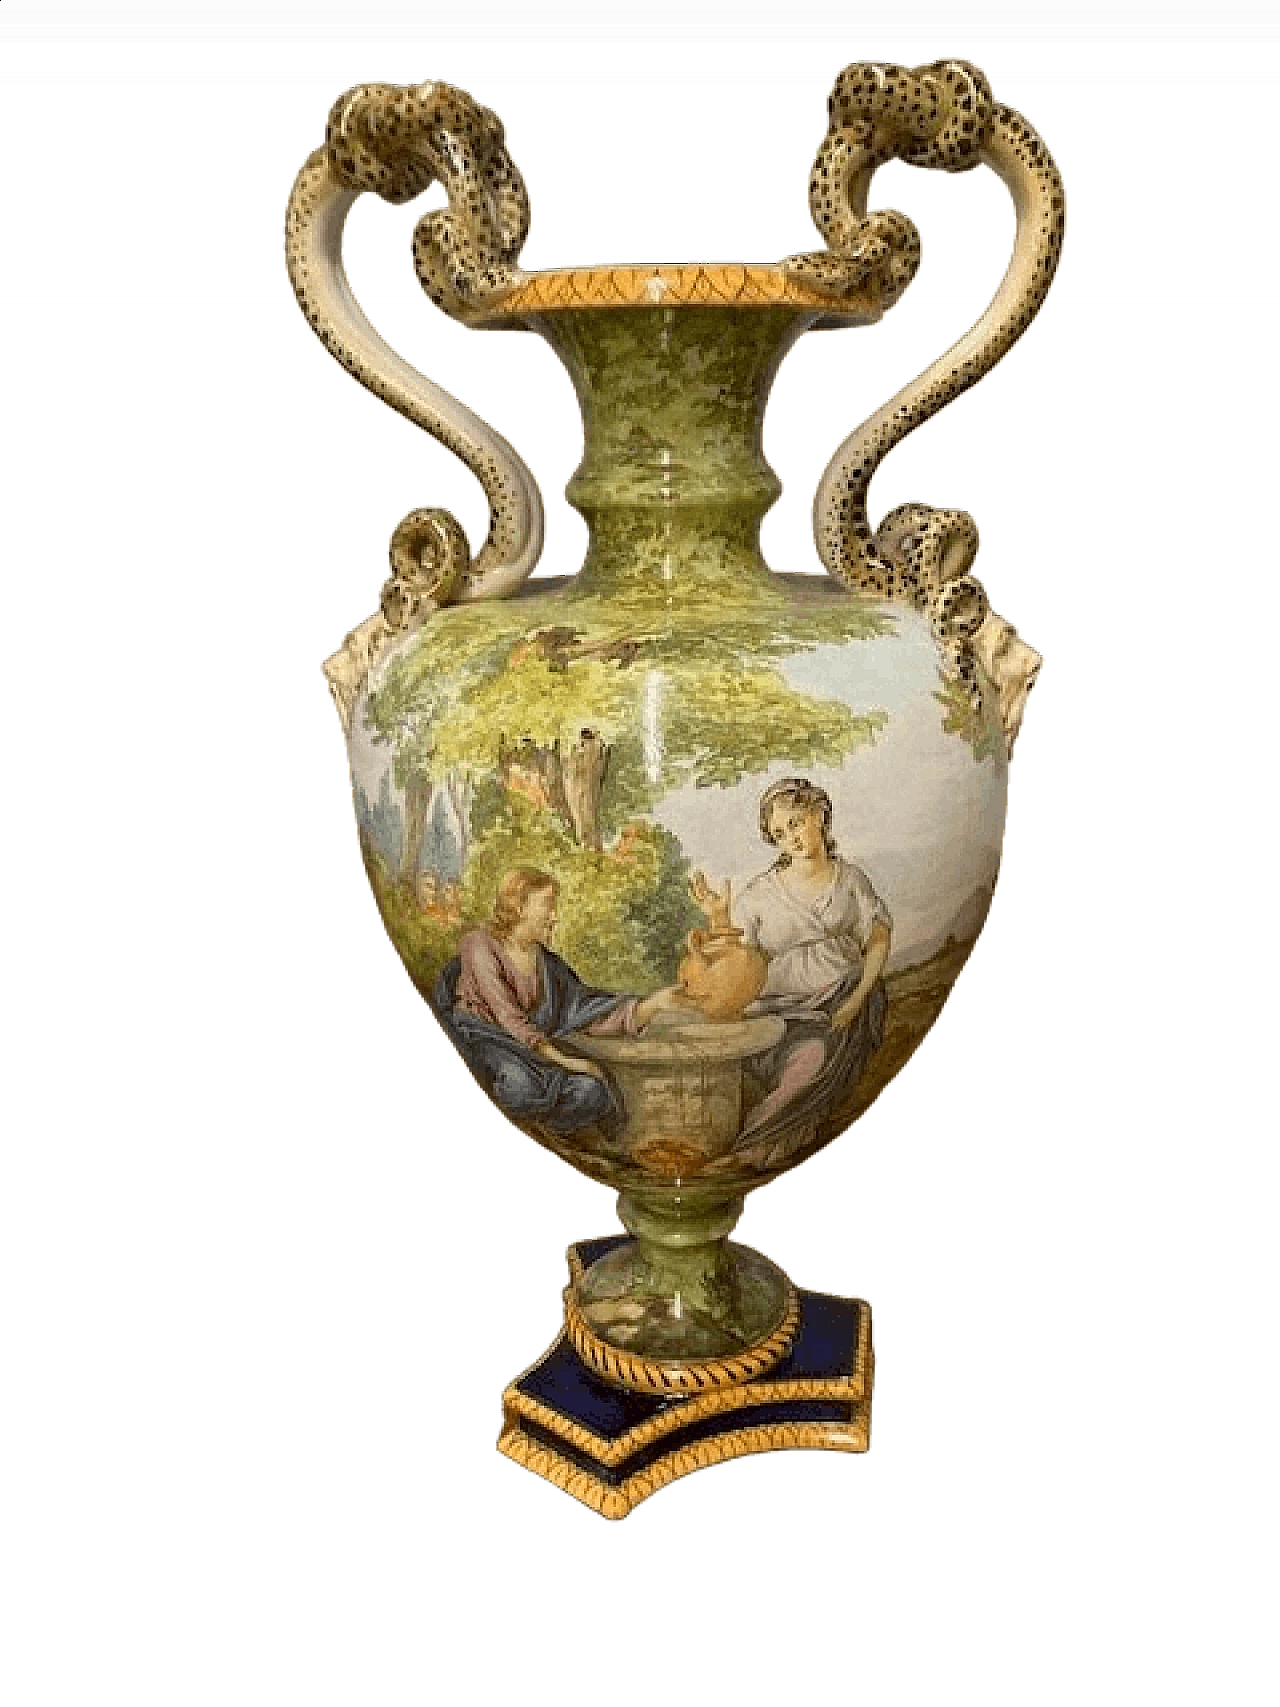 Storied vase depicting The samaritan woman at the well by Ginori, 1860 19